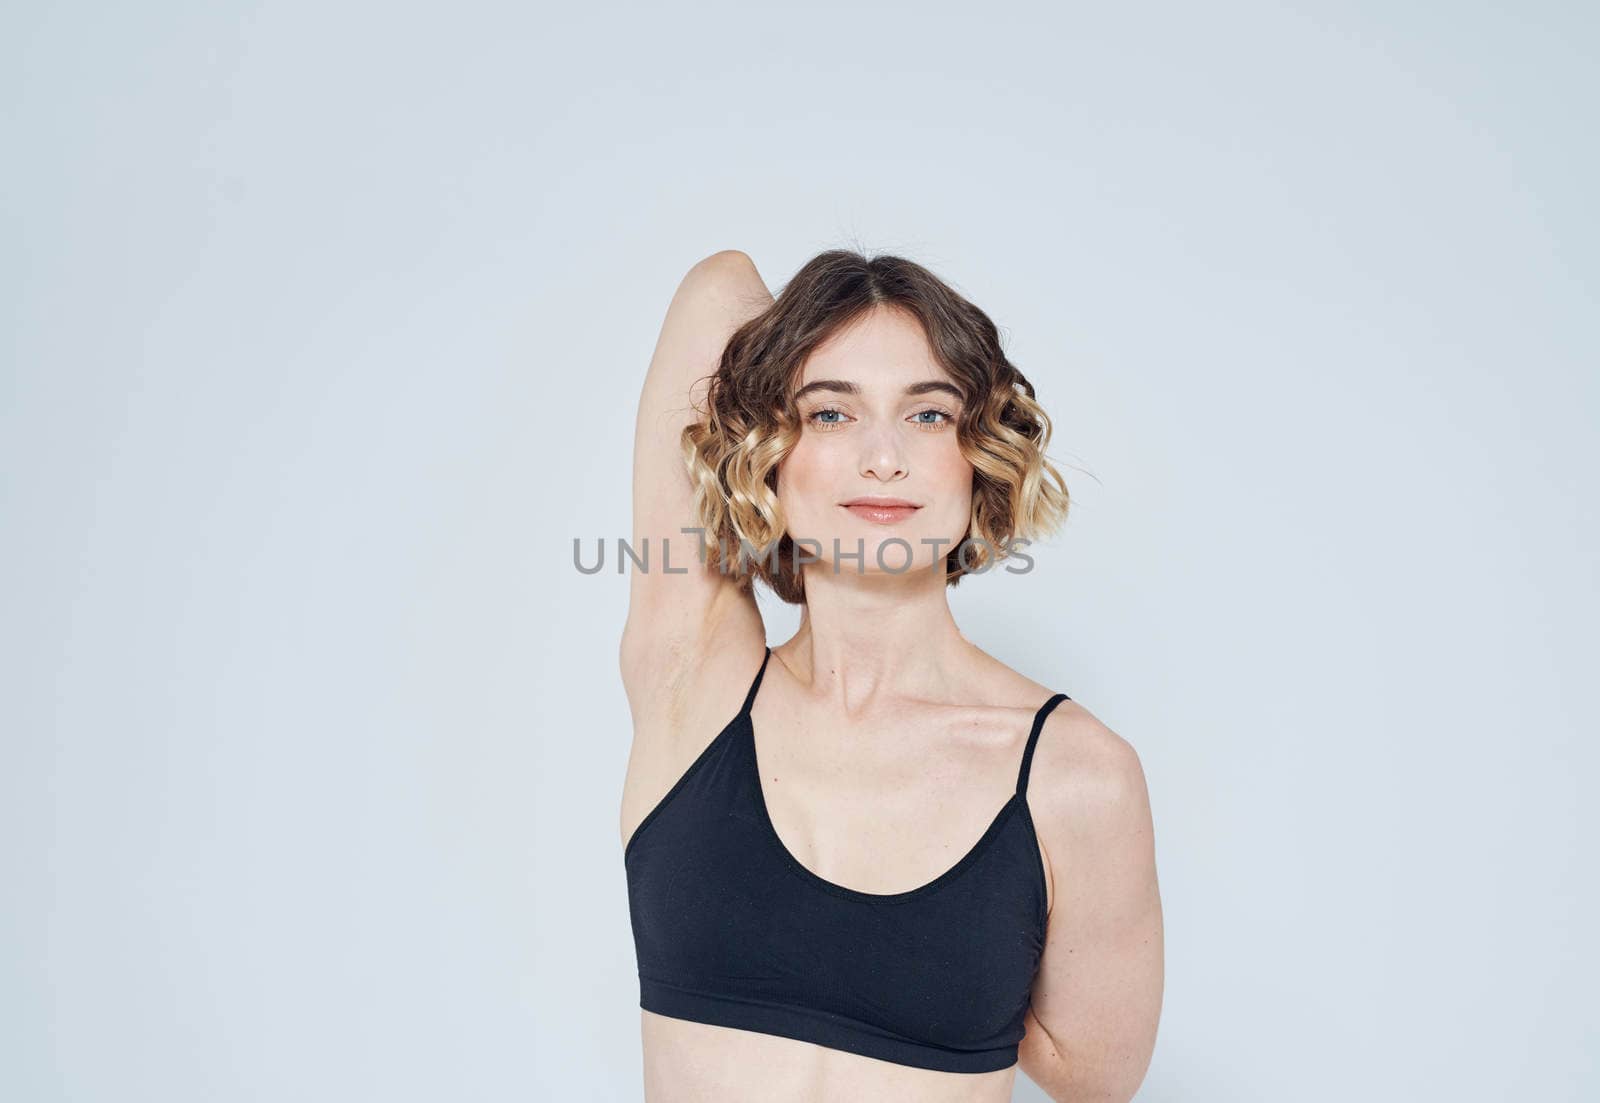 A strange woman in a short T-shirt has joined her hands behind her back on a light background. High quality photo